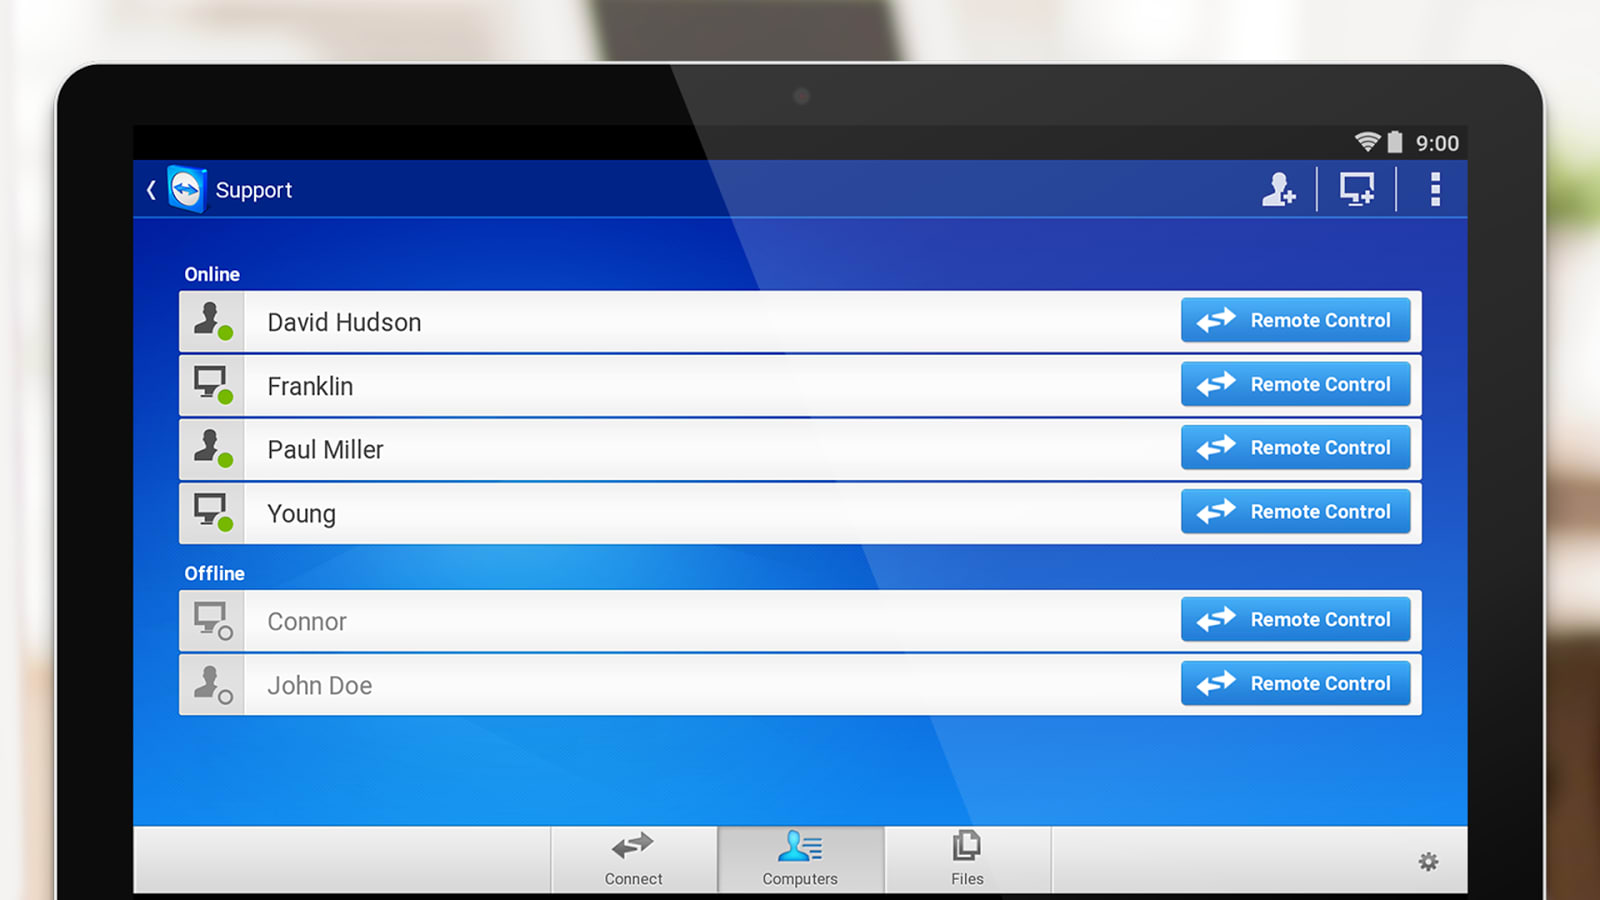 teamviewer for android phone download